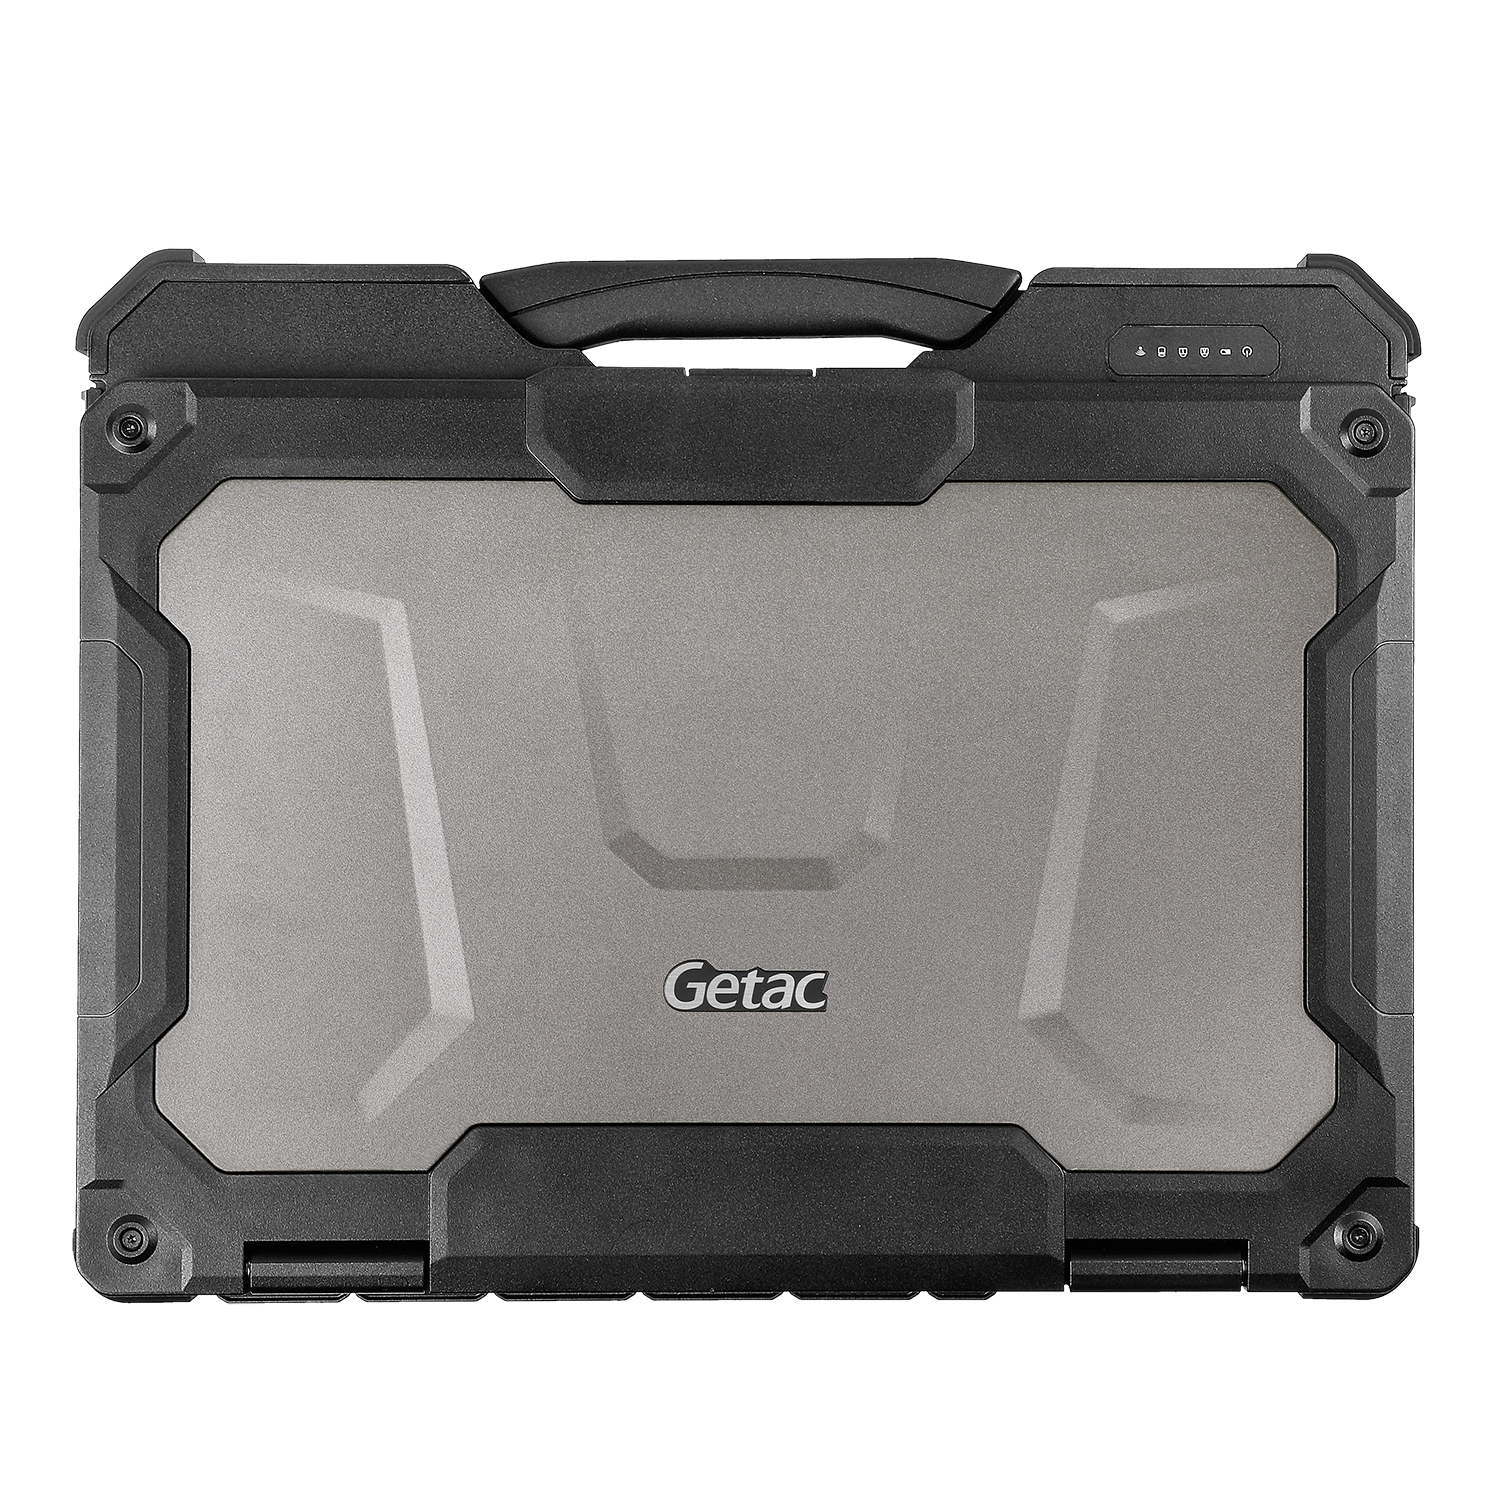 Getac X600 Fully Rugged Laptop with closed lid and handle on white background.